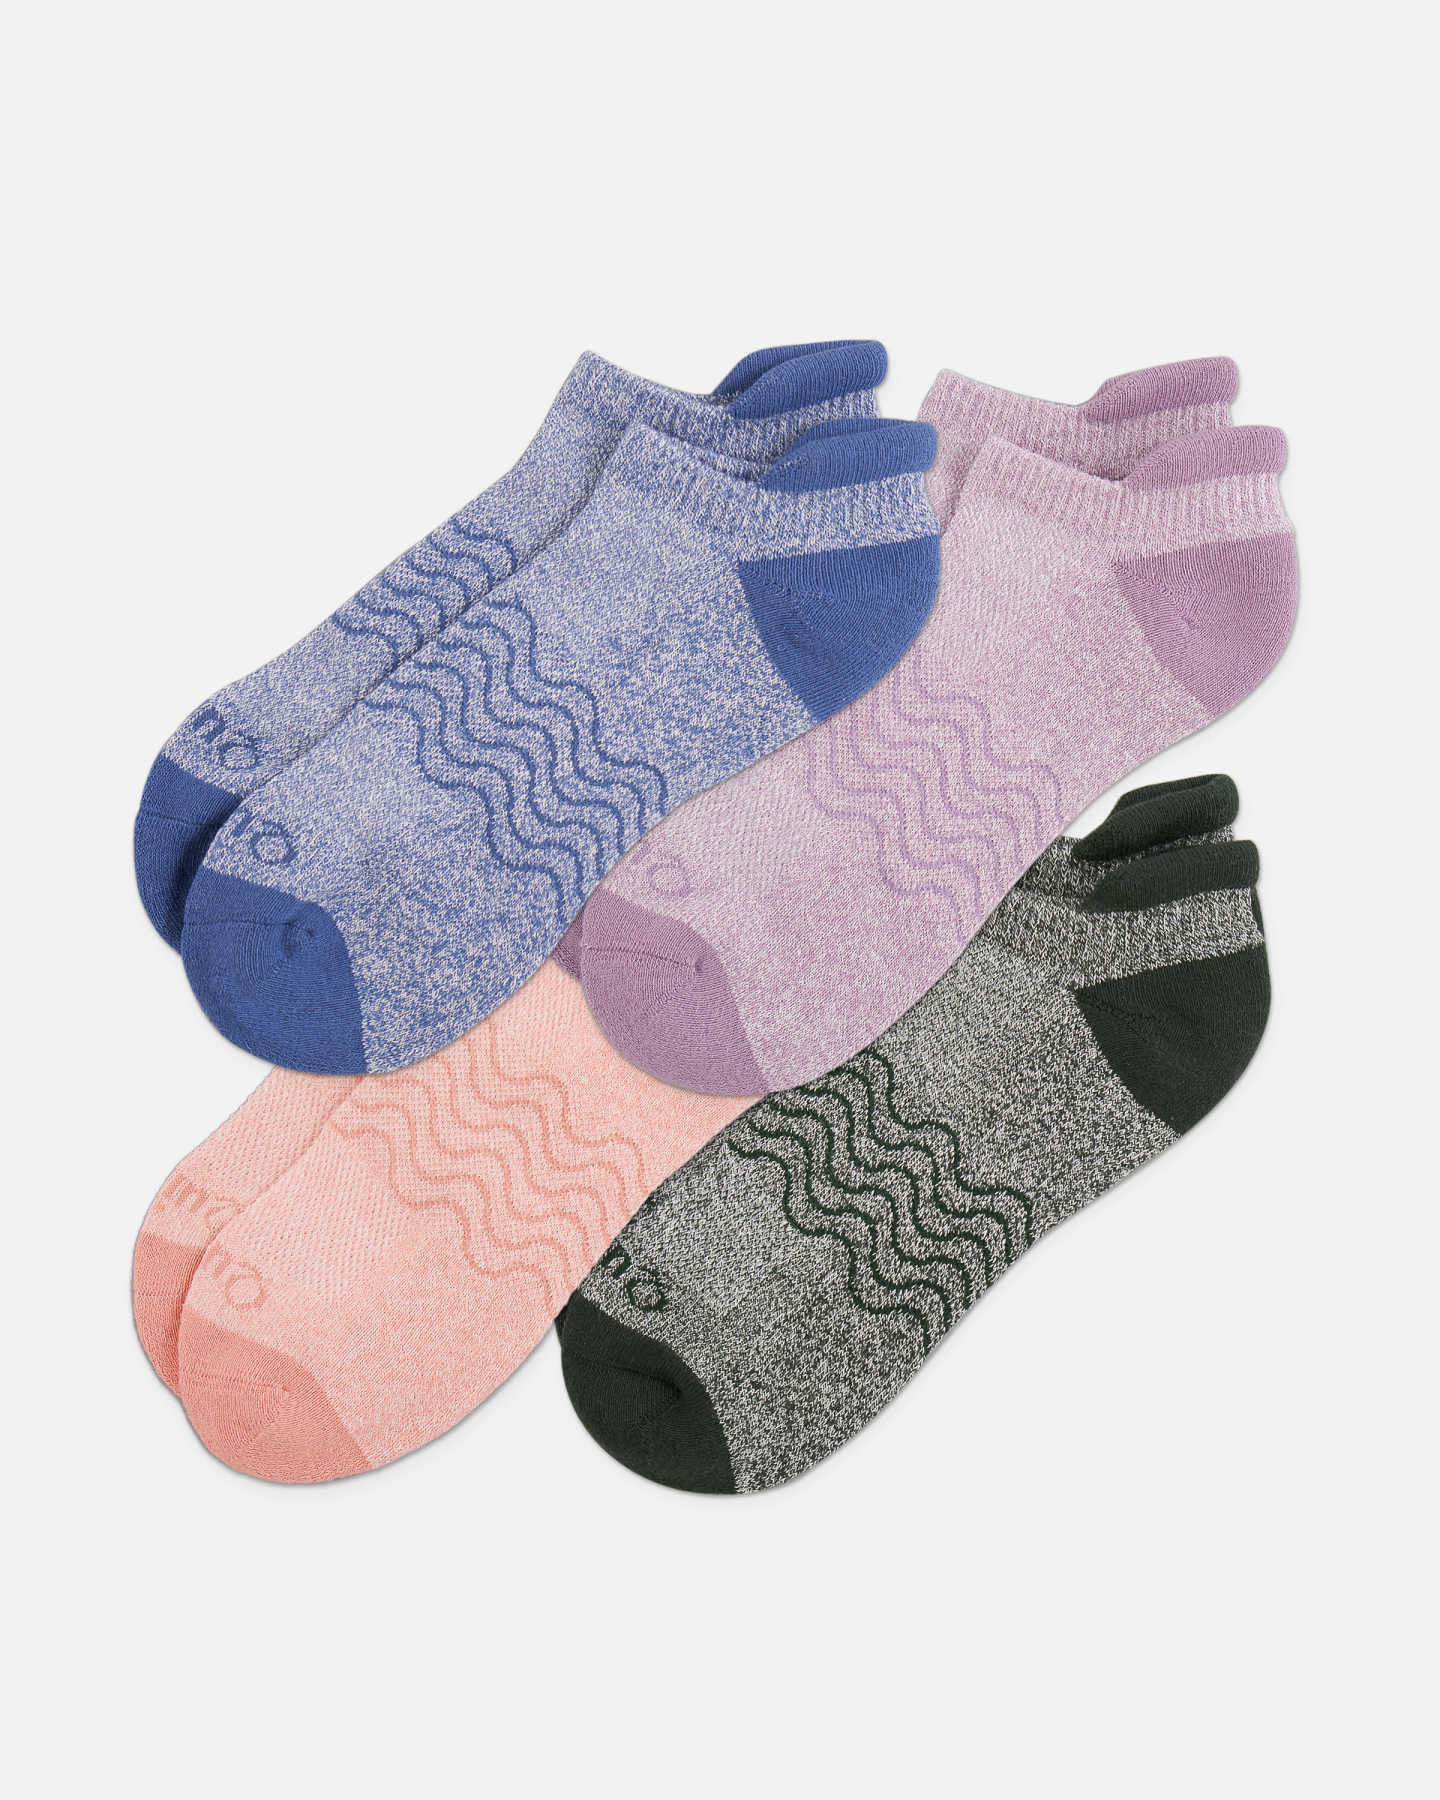 You May Also Like - Organic Colorblock Marl Ankle Socks (4-pack) - Pink/Blue/Purple Mix